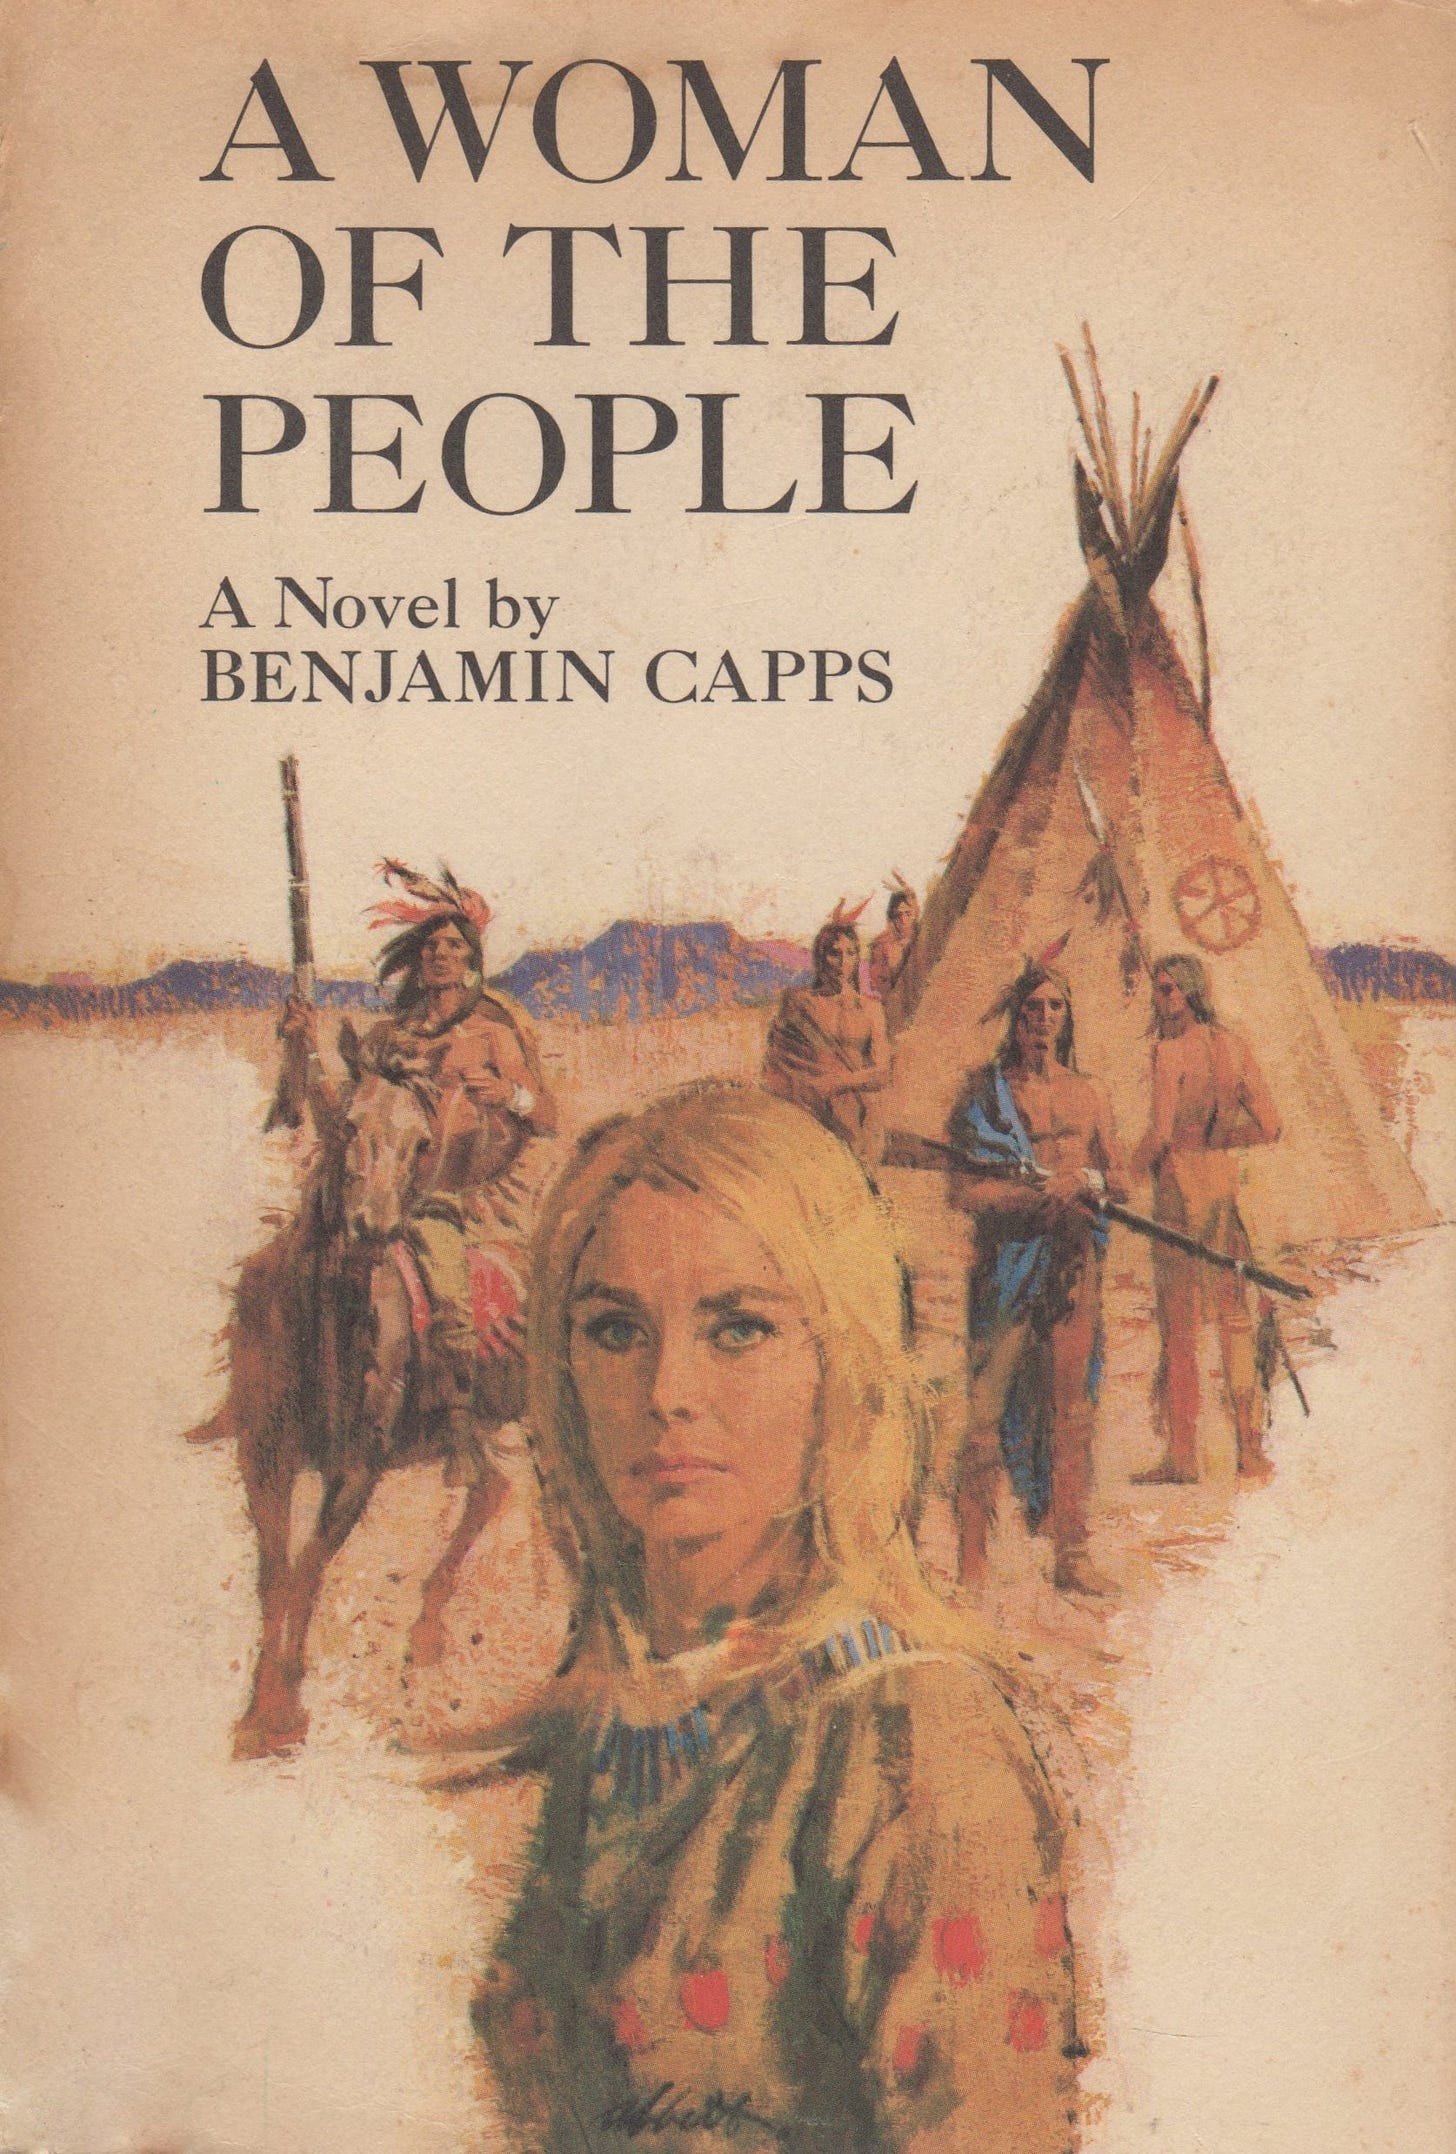 A Women of the People: Benjamin Capps: Amazon.com: Books